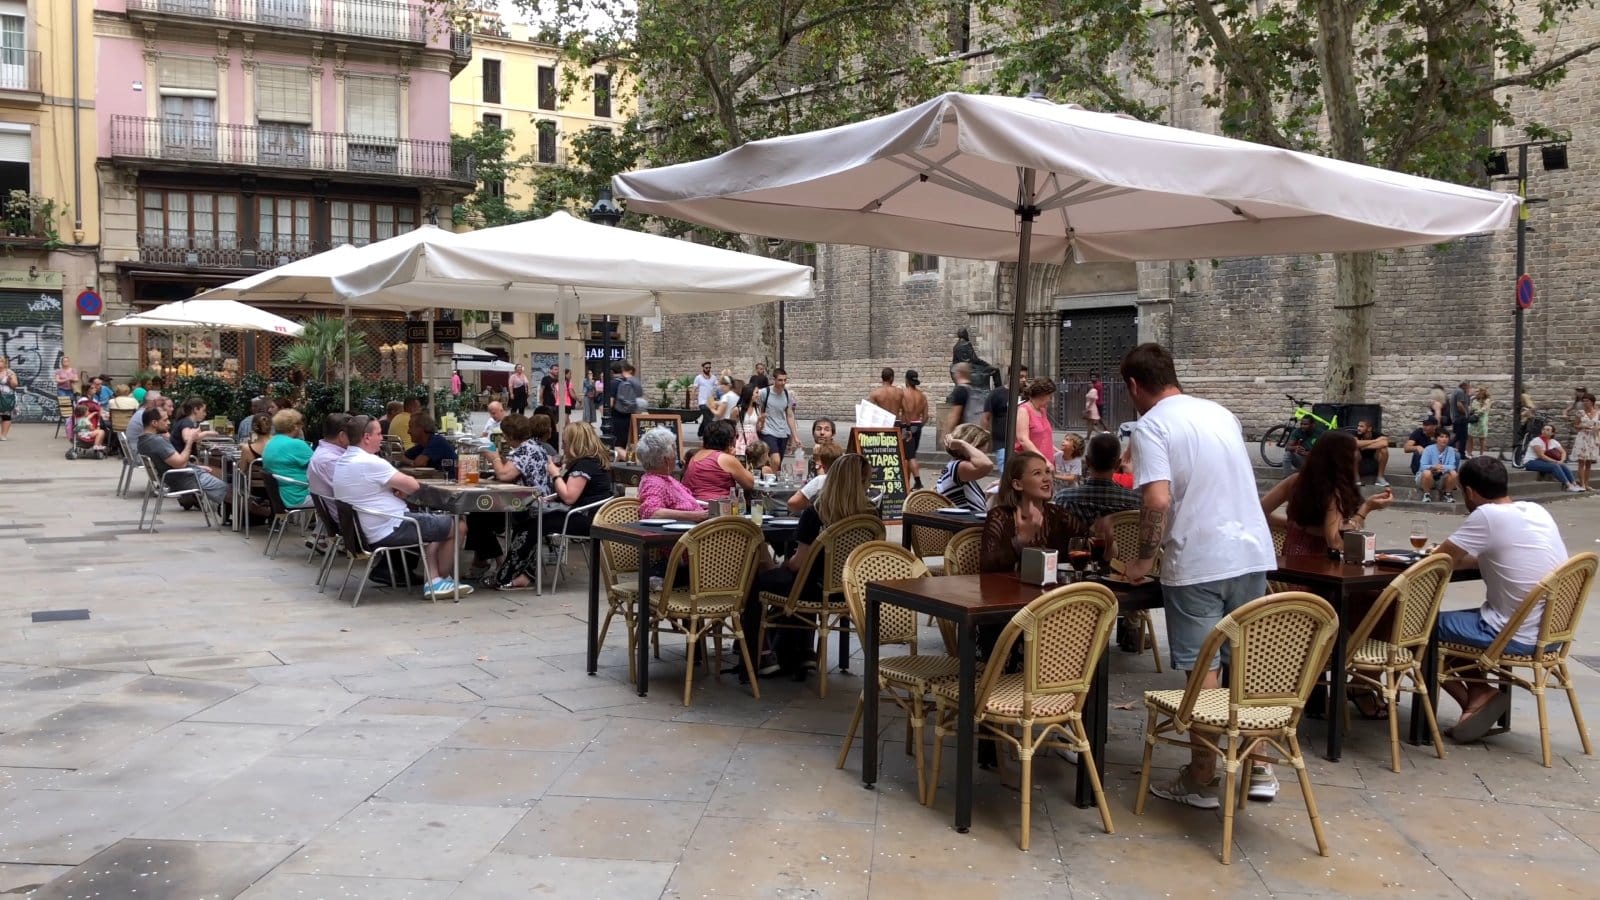 <p class="wp-caption-text">Image Credit: Shutterstock / grigoriy belyaevn</p>  <p><span>The Gothic Quarter, with its labyrinthine streets and medieval architecture, is a historical treasure and a hub for some of Barcelona’s most iconic cafés and bistros. These establishments, set against centuries-old buildings, offer a blend of traditional Catalan cuisine and European fare. The area’s historic cafés, in particular, are where one can enjoy a coffee or meal alongside locals and tourists. These spots often serve as perfect retreats to enjoy a leisurely breakfast or a mid-afternoon snack while soaking in the ambiance of old Barcelona.</span></p>